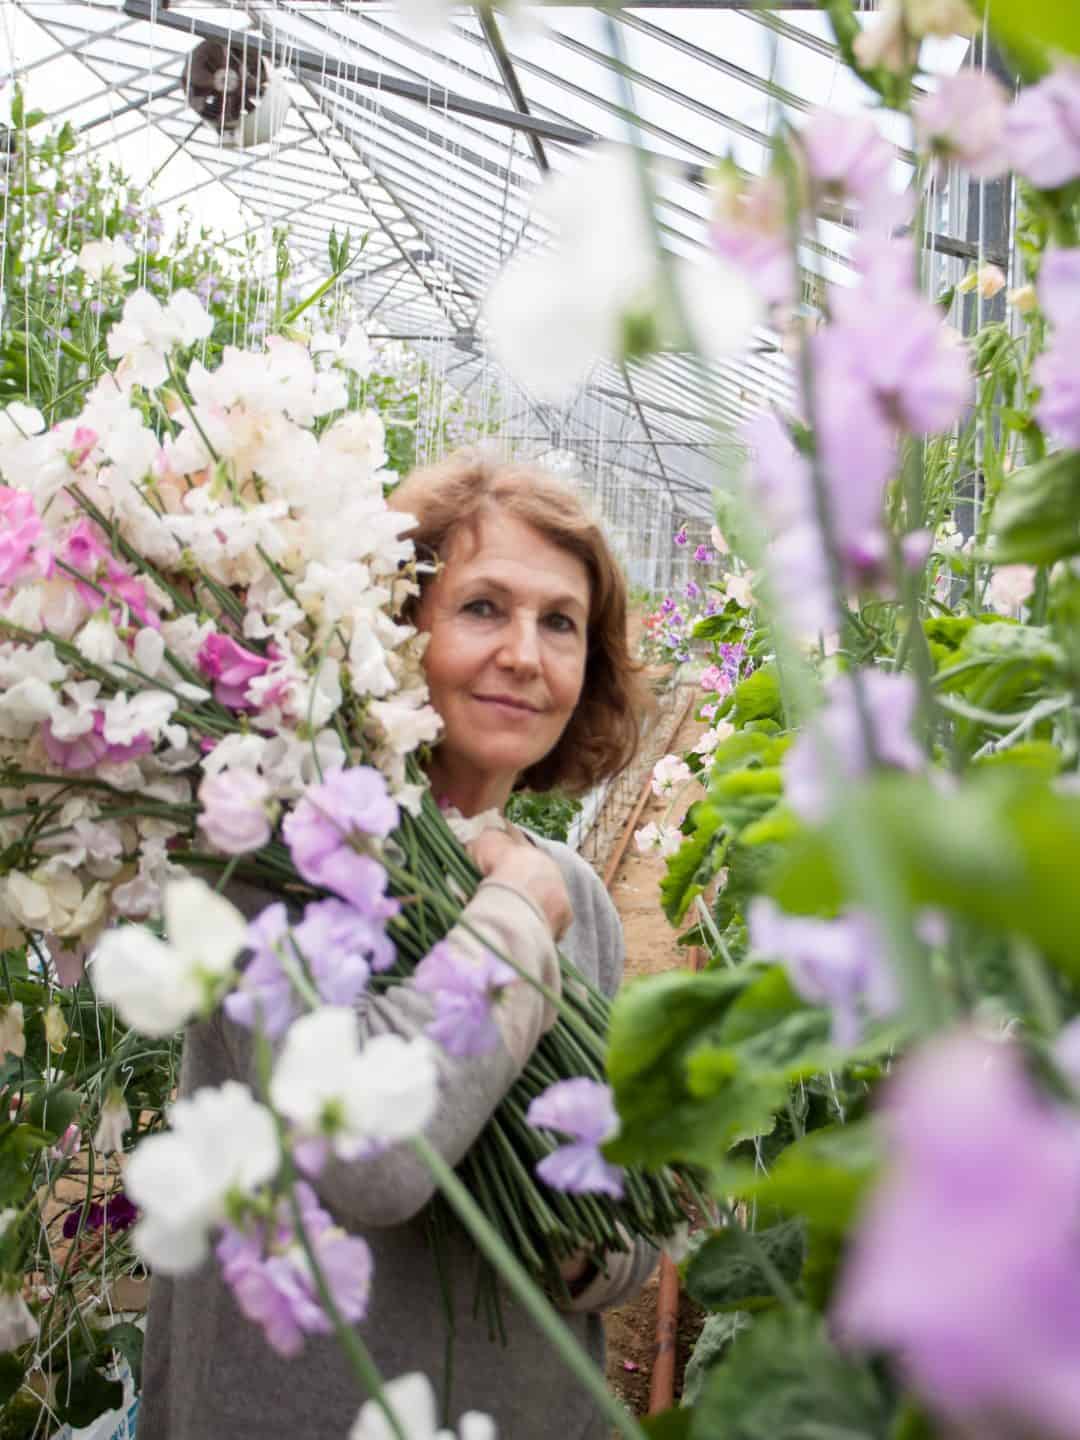 rosebie morton founder of the real flower company with armfuls of sweet peas